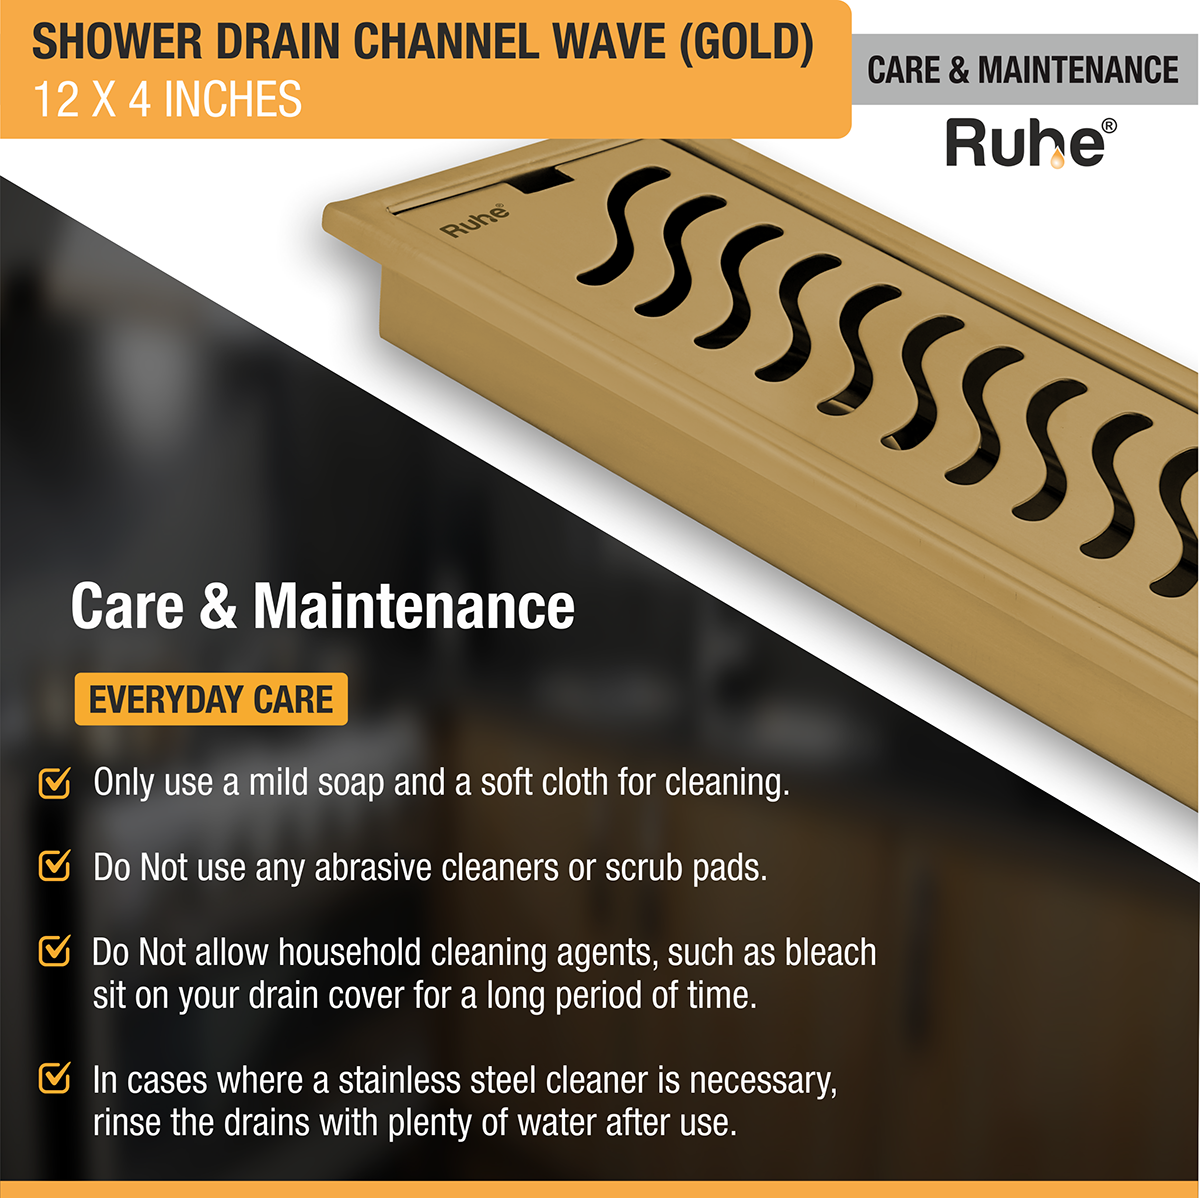 Wave Shower Drain Channel (12 x 4 Inches) YELLOW GOLD care and maintenance